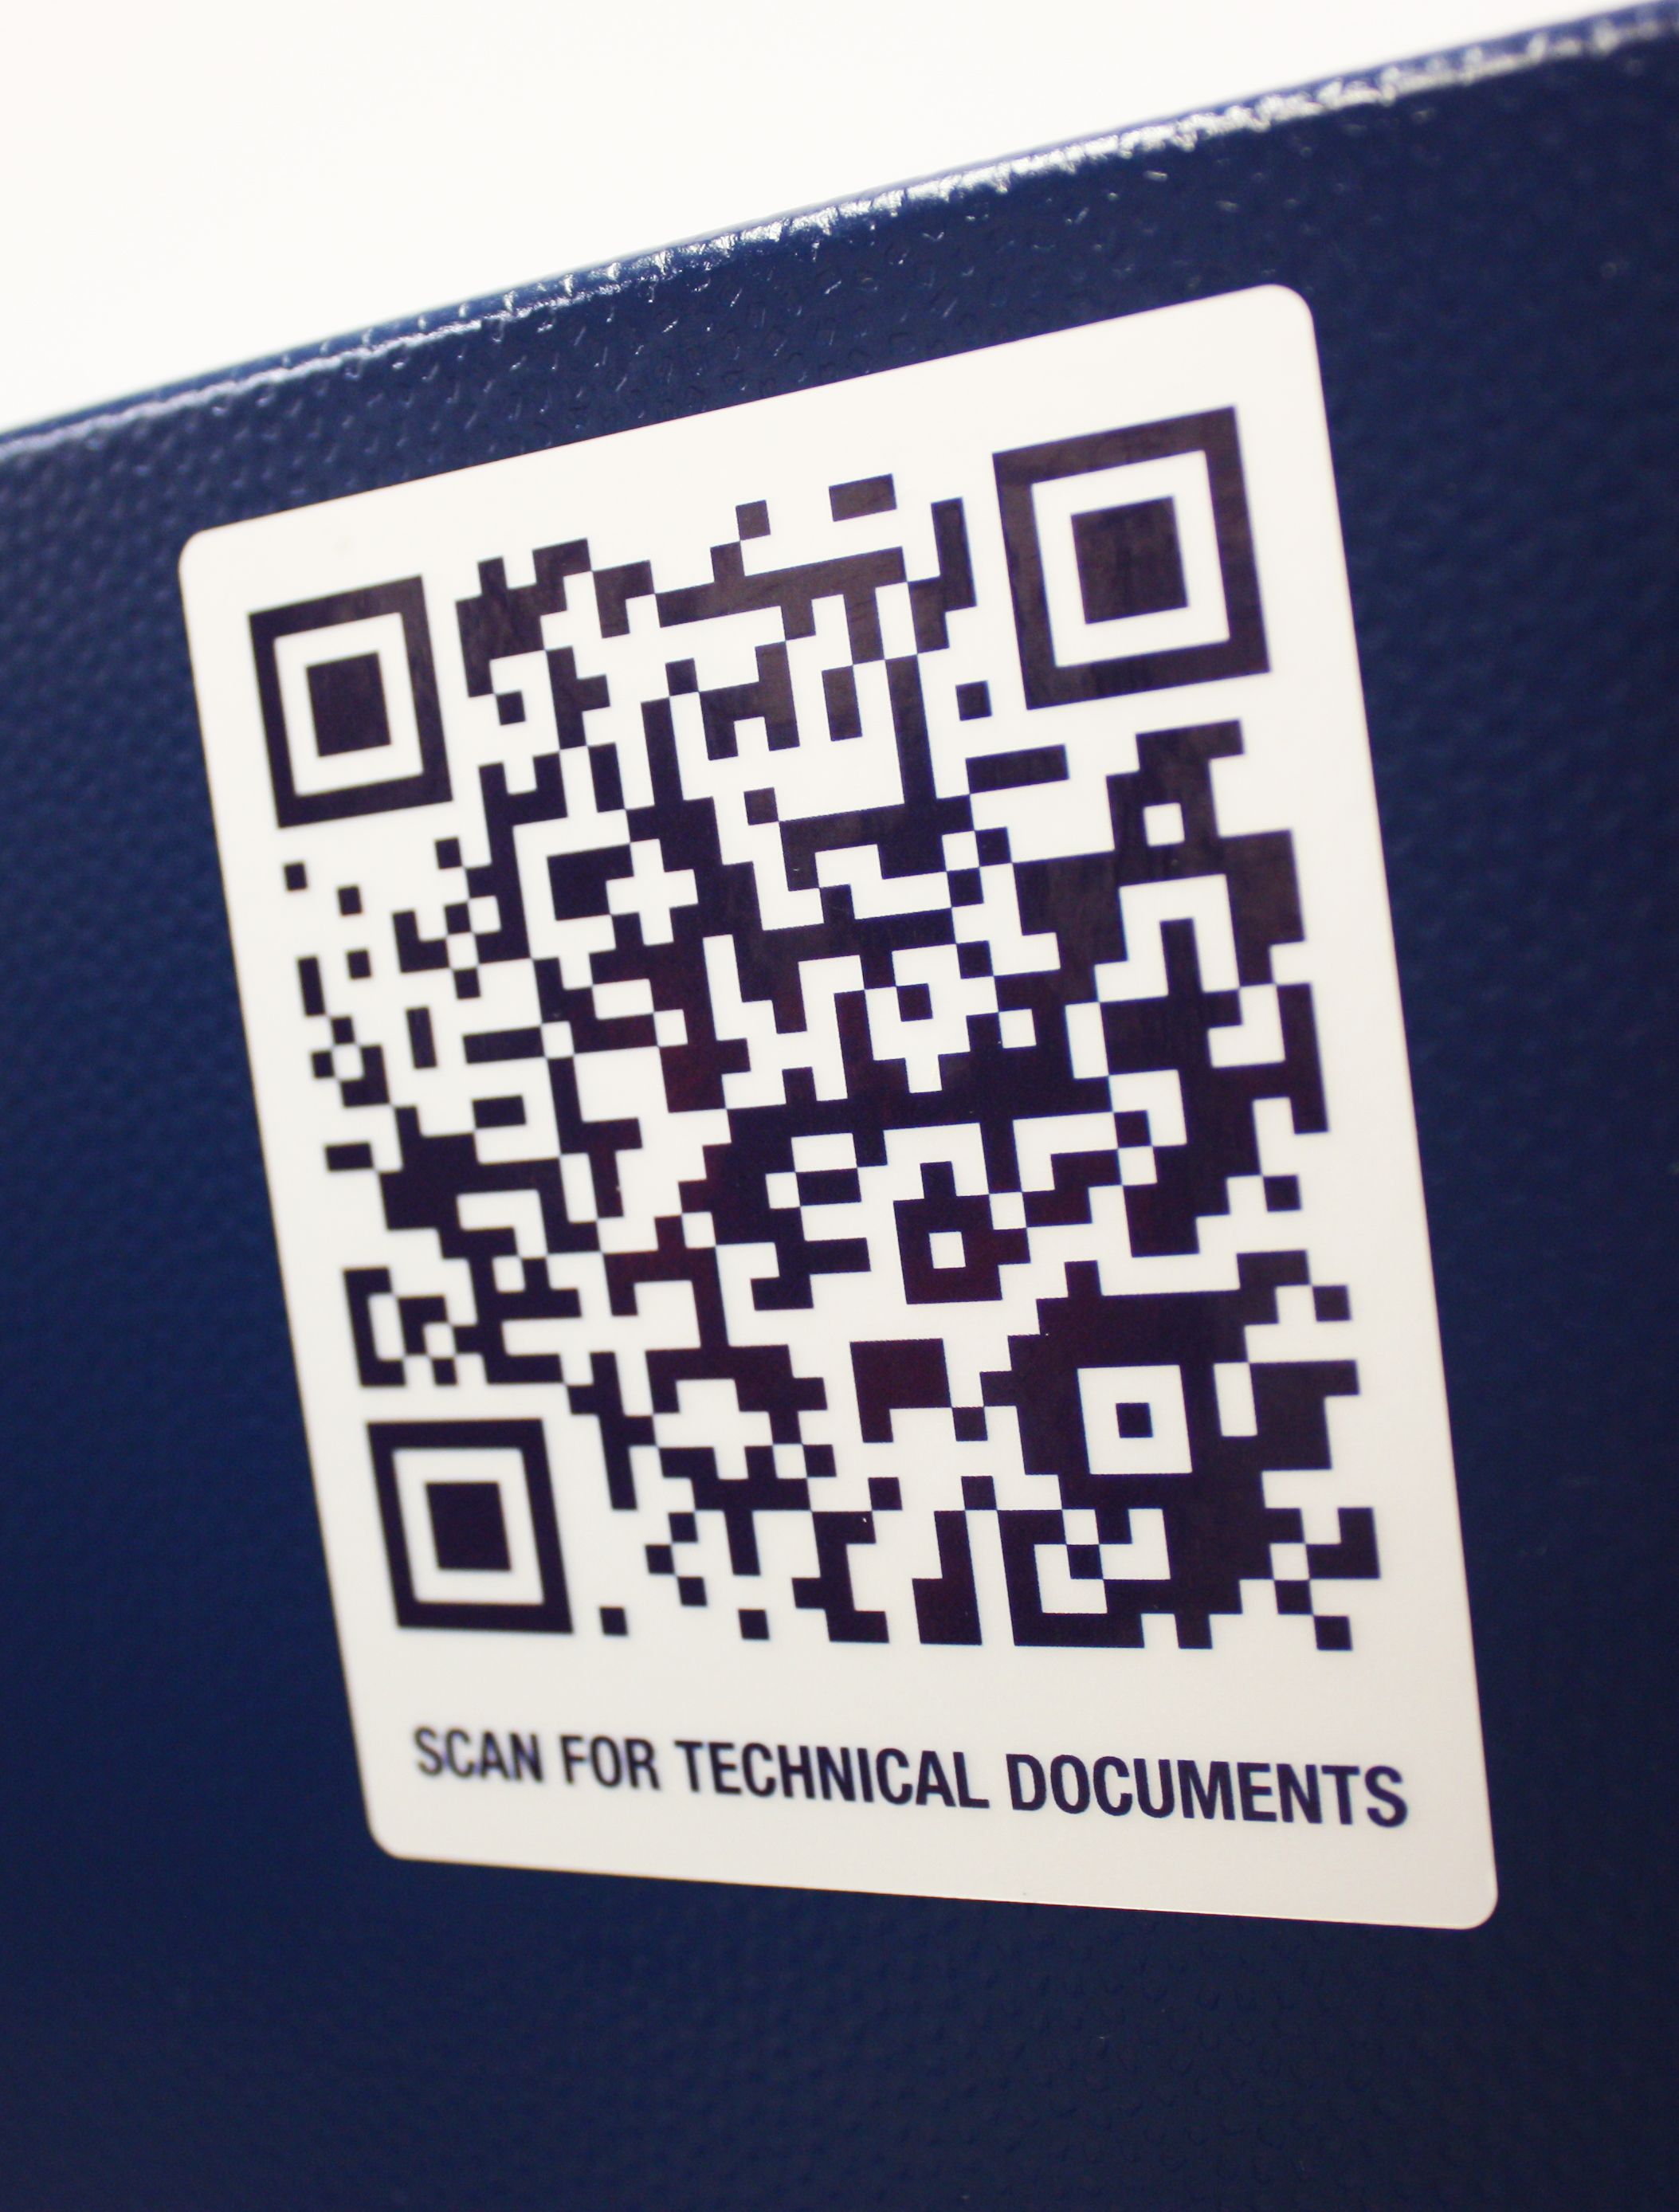 HEATSTAR offer technical support with new QR codes